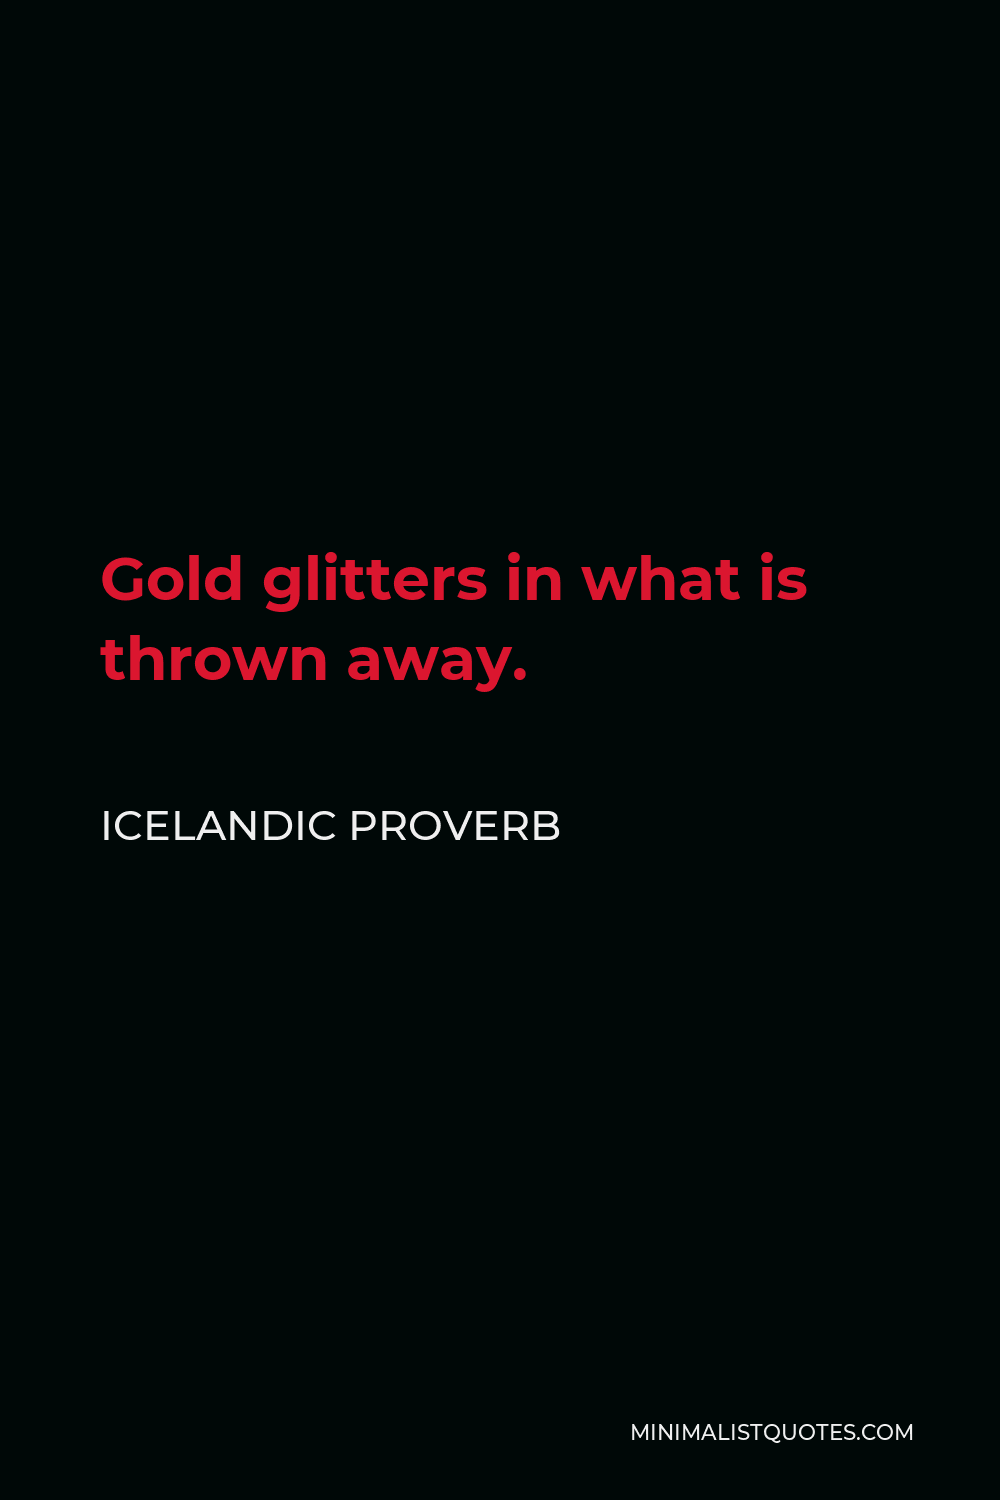 Icelandic Proverb Quote - Gold glitters in what is thrown away.